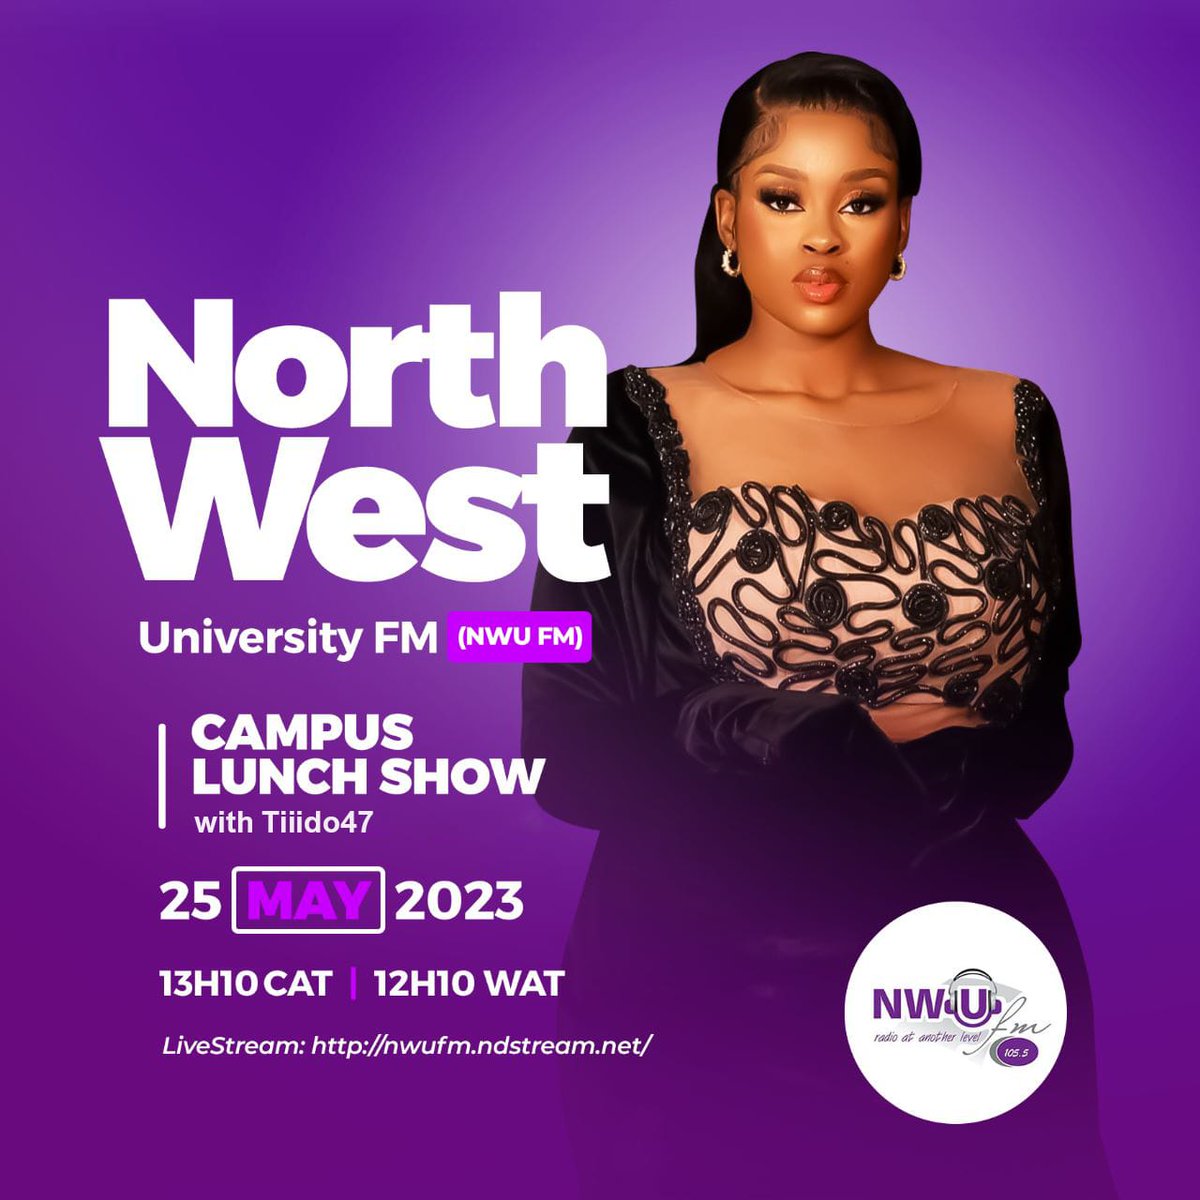 R E M I N D E R 🚨

Queen Rose will be on the radiowaves in 10 minutes!🤩
 Please tune in to the Campus Lunch Show with @tiiido47 on @NWUFm_1055

📆: 25 MAY 2023
⏰: 13:10 CAT / 12:10 WAT
🔗: nwufm.ndstream.net

AFRICA DAY WITH IPELENG
IPELENG THE BRAND
#IpelengRSelepe